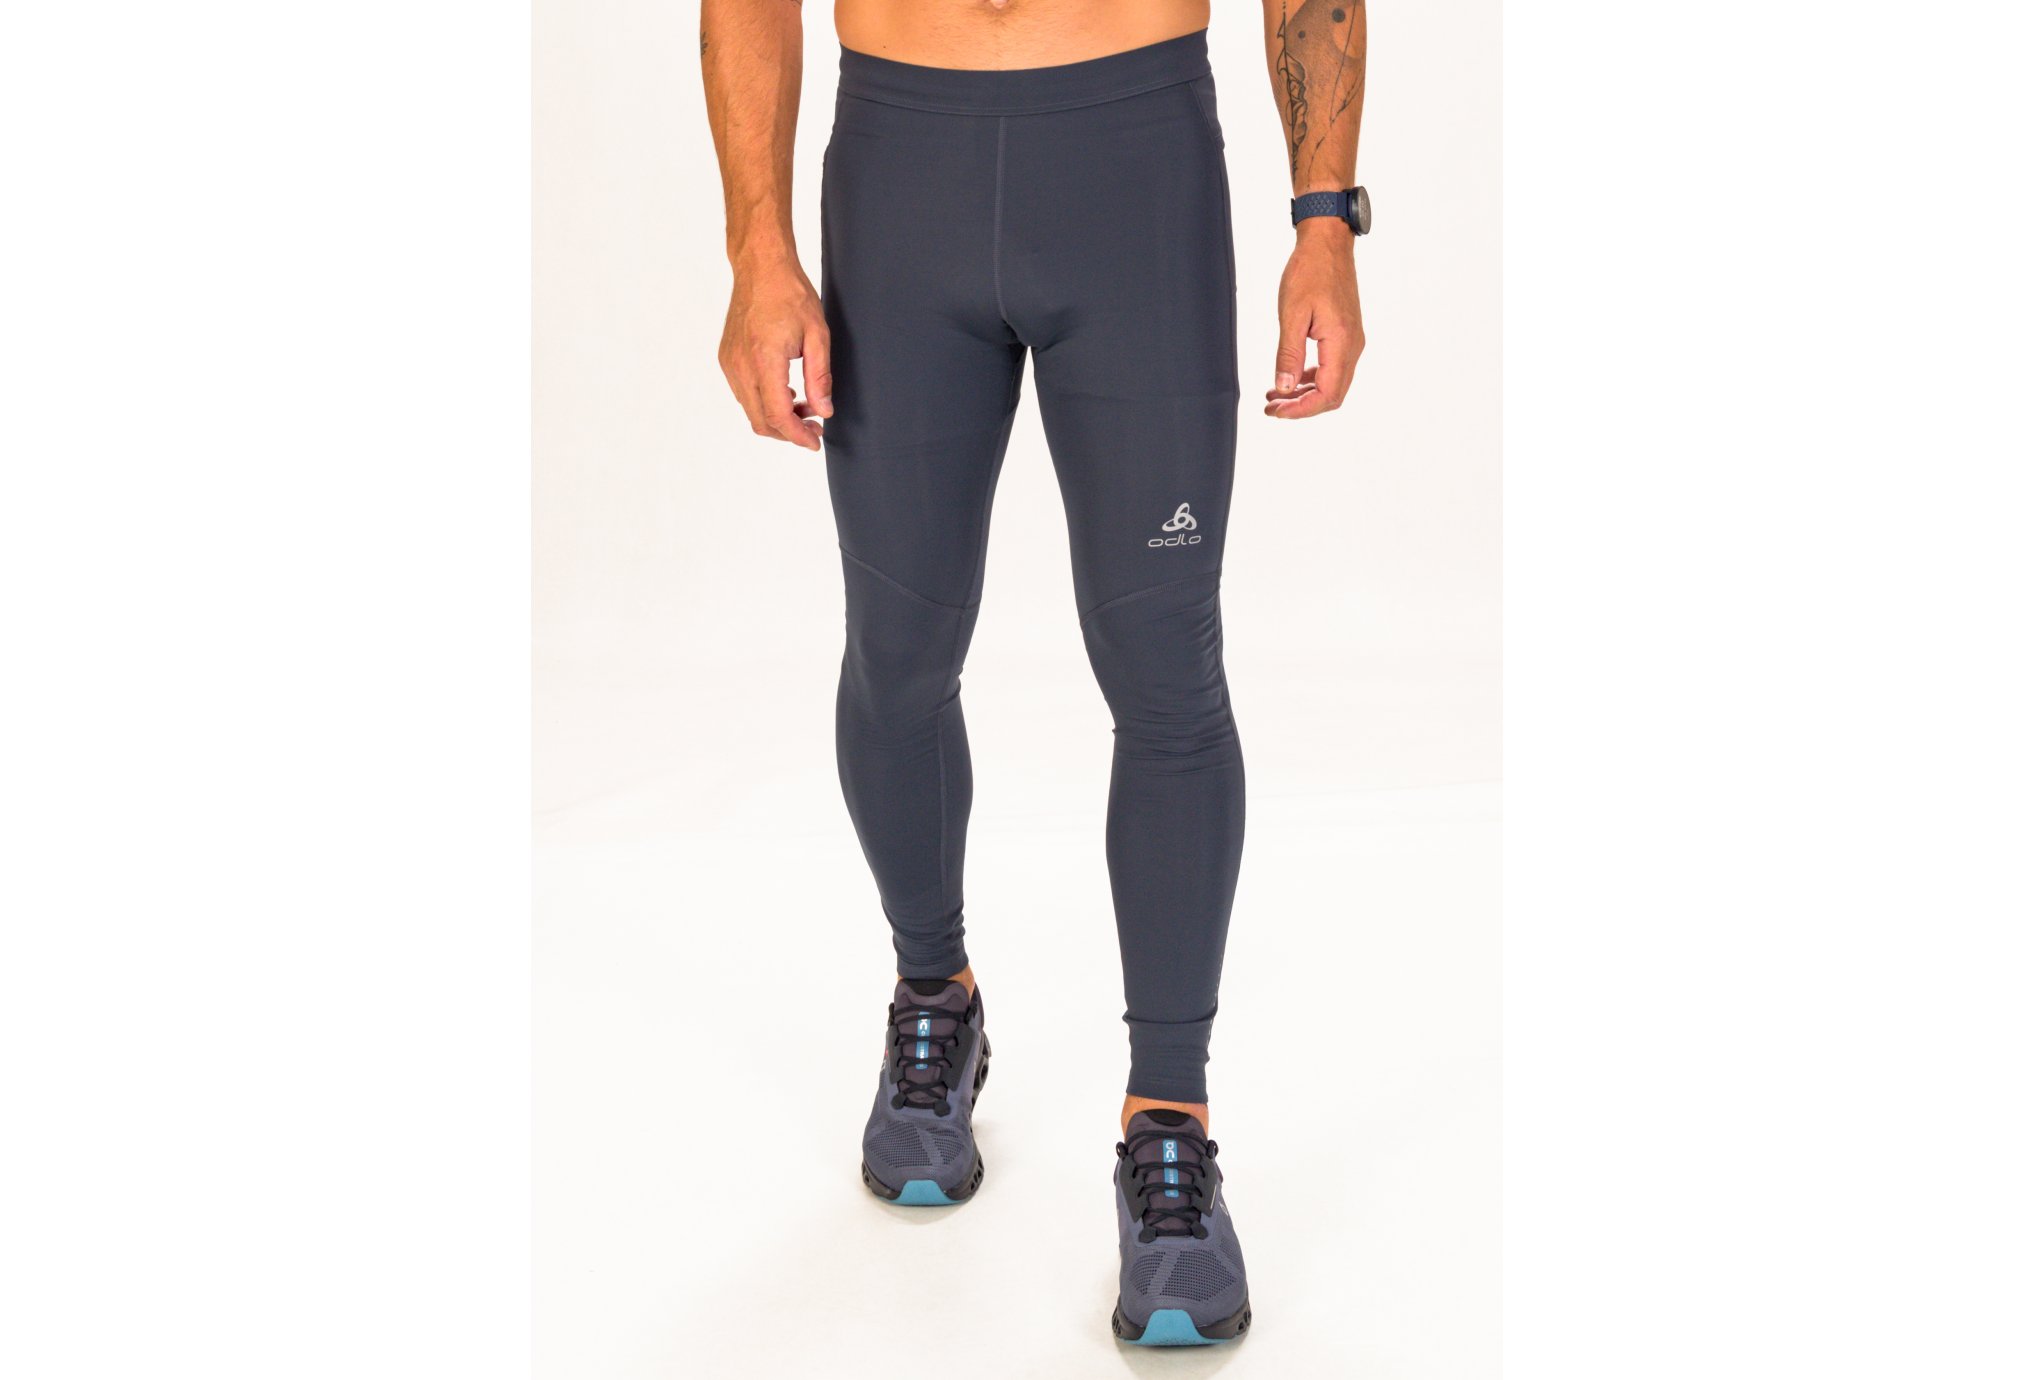 Odlo 3/4 Essential - Collant running homme